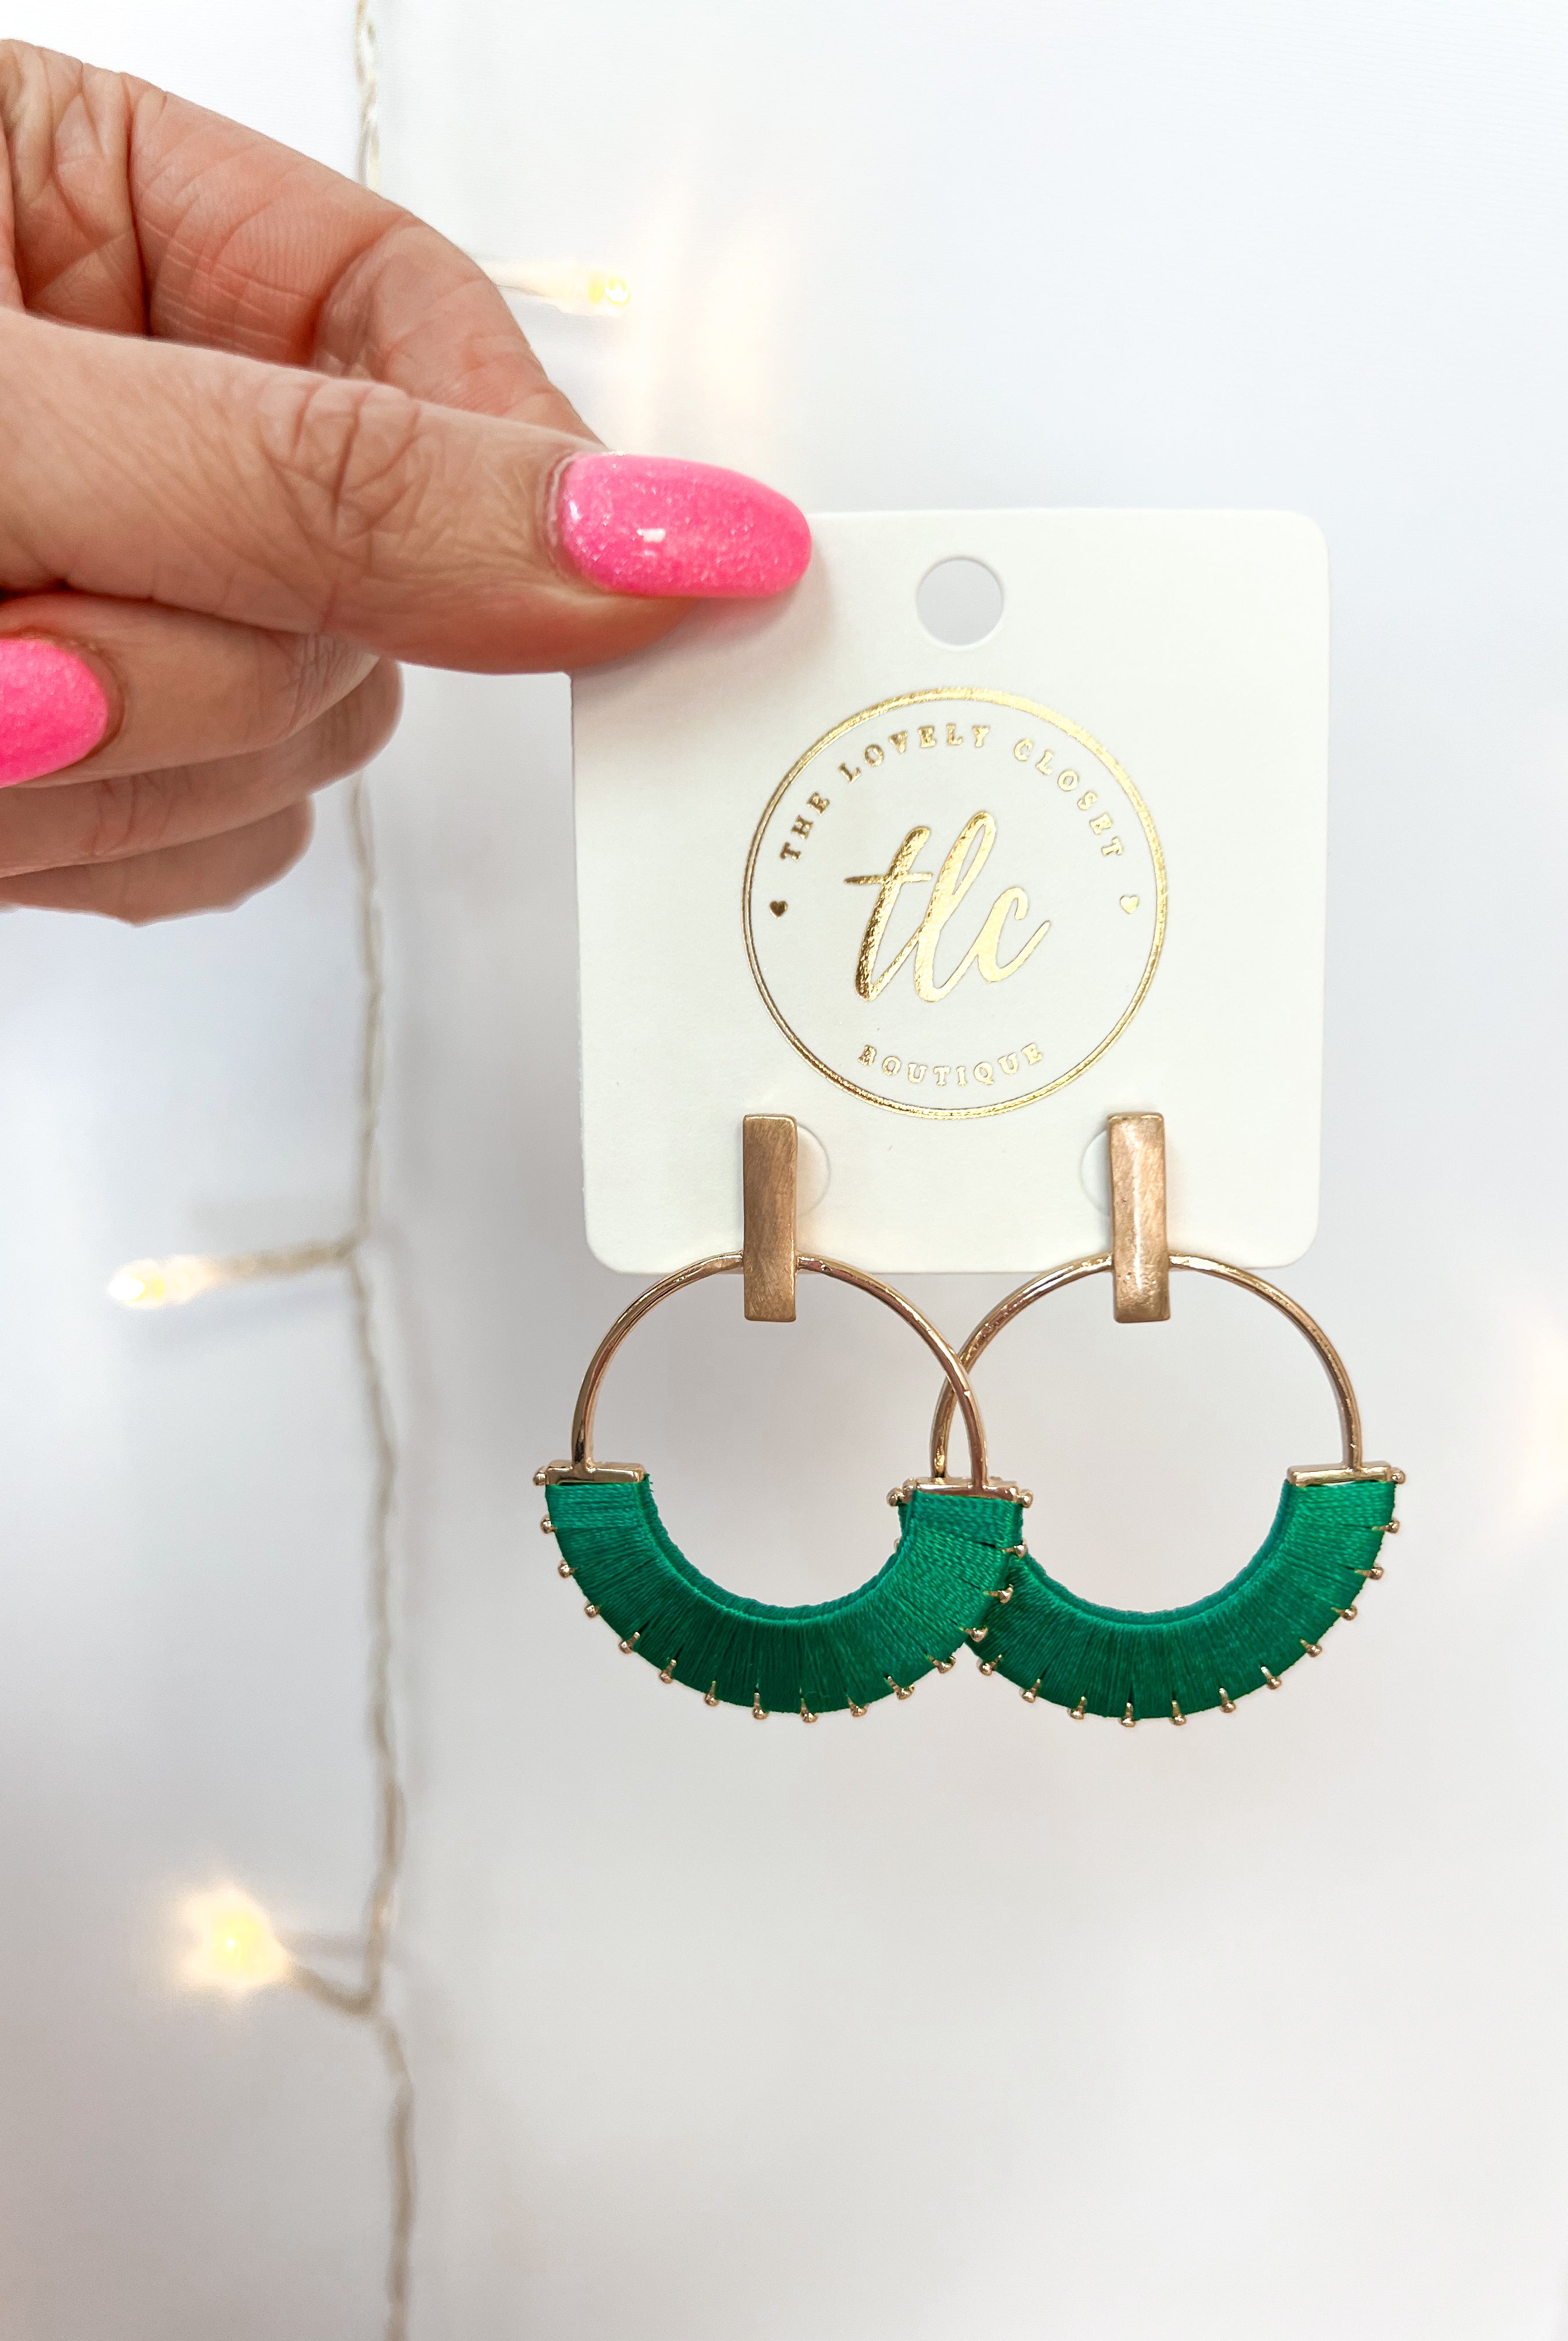 Green & Chic Earring-Earrings-The Lovely Closet-The Lovely Closet, Women's Fashion Boutique in Alexandria, KY